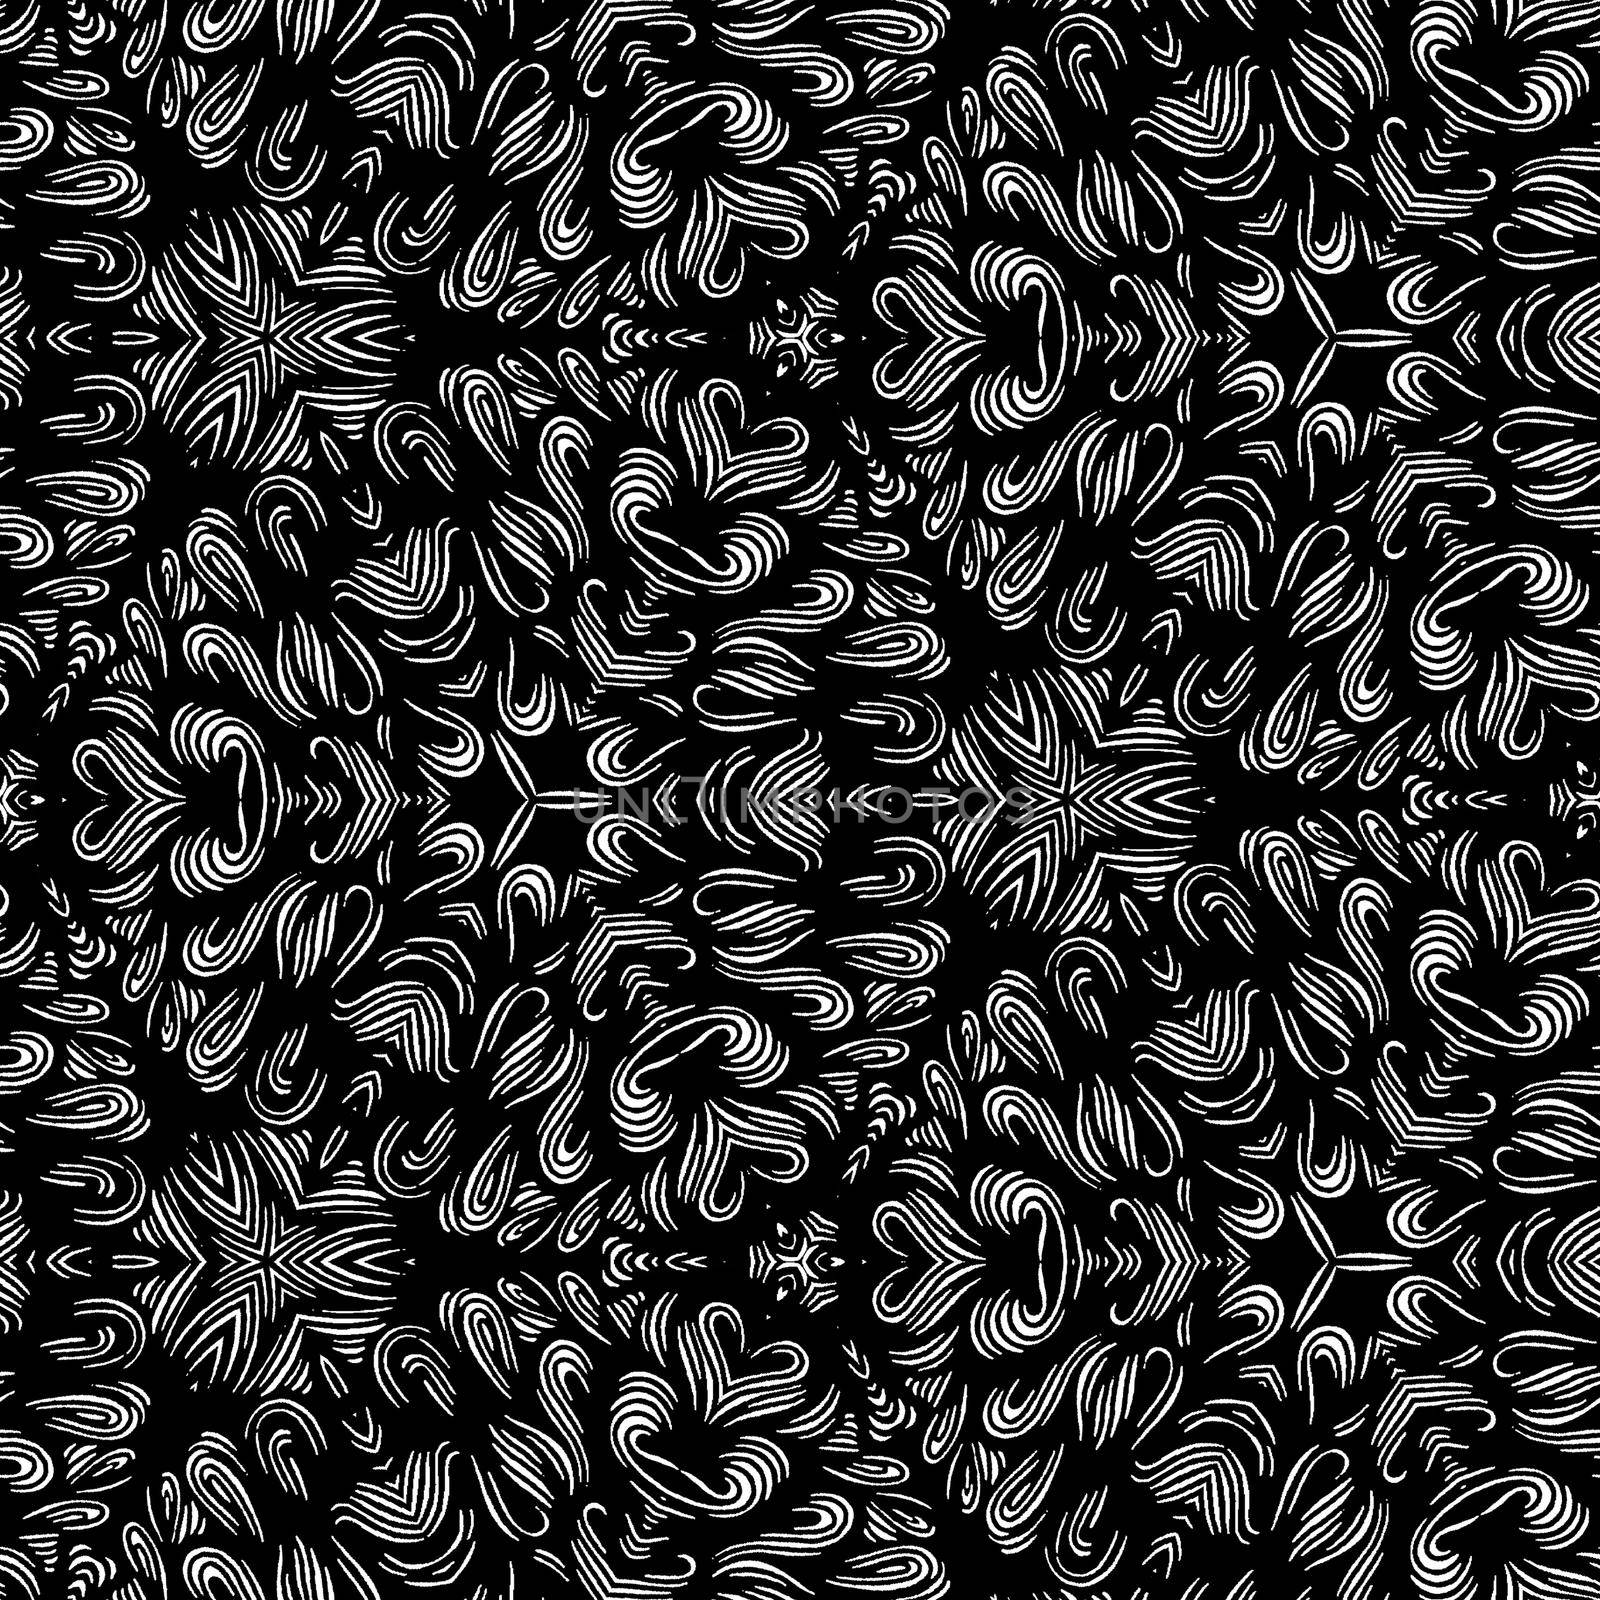 Beautiful and elegant monochromatic and grey symmetrical mandala designs on solid sheet of wallpaper by tabishere